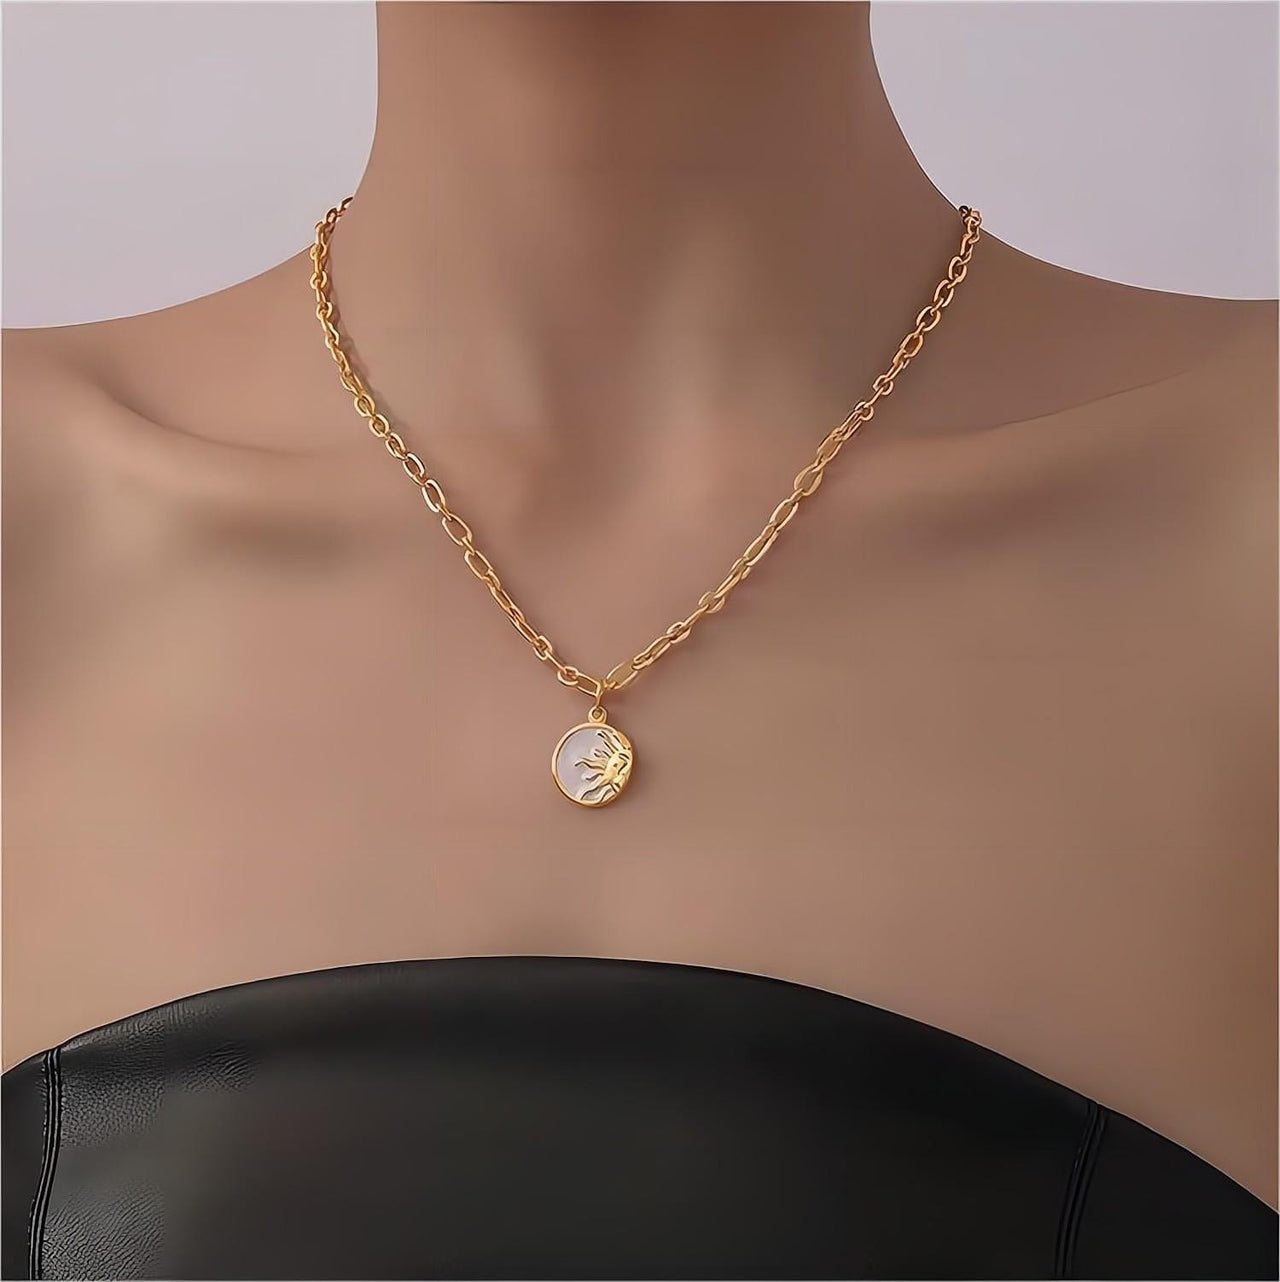 24K Gold Plated Sol And Lune Celestial Necklace - ArtGalleryZen